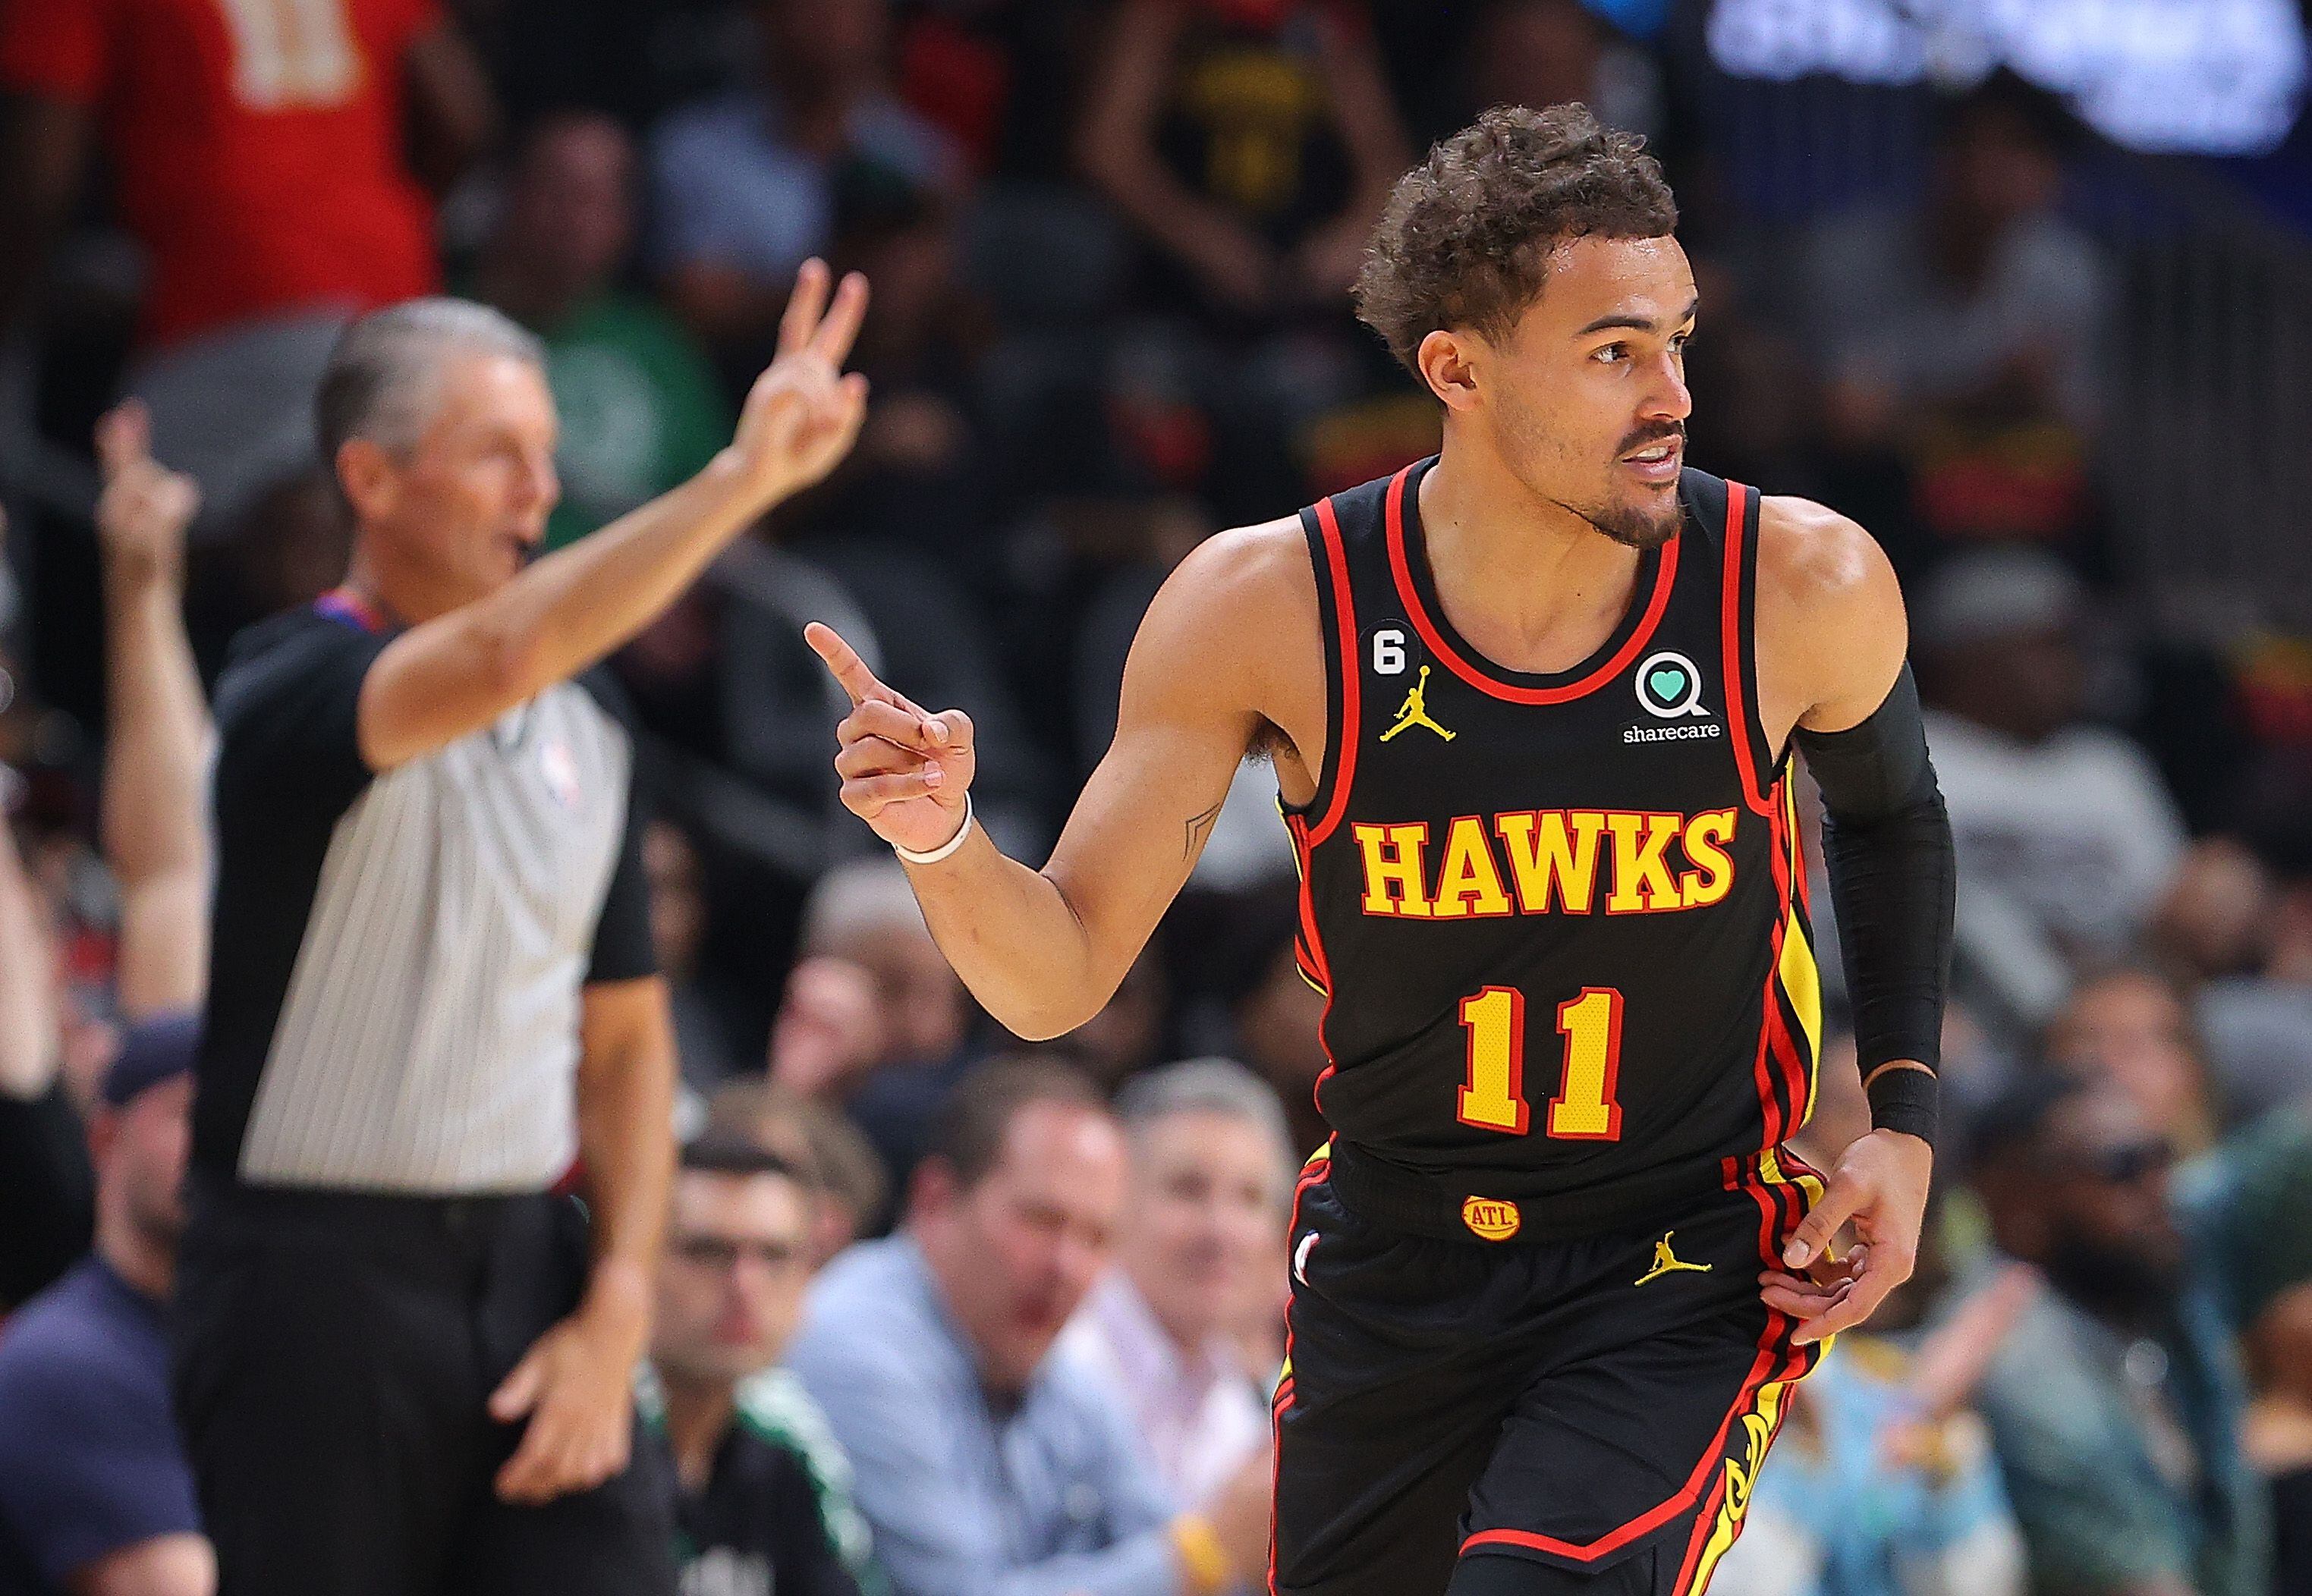 Atlanta Hawks star Trae Young ties knot with college sweetheart – WSB-TV  Channel 2 - Atlanta